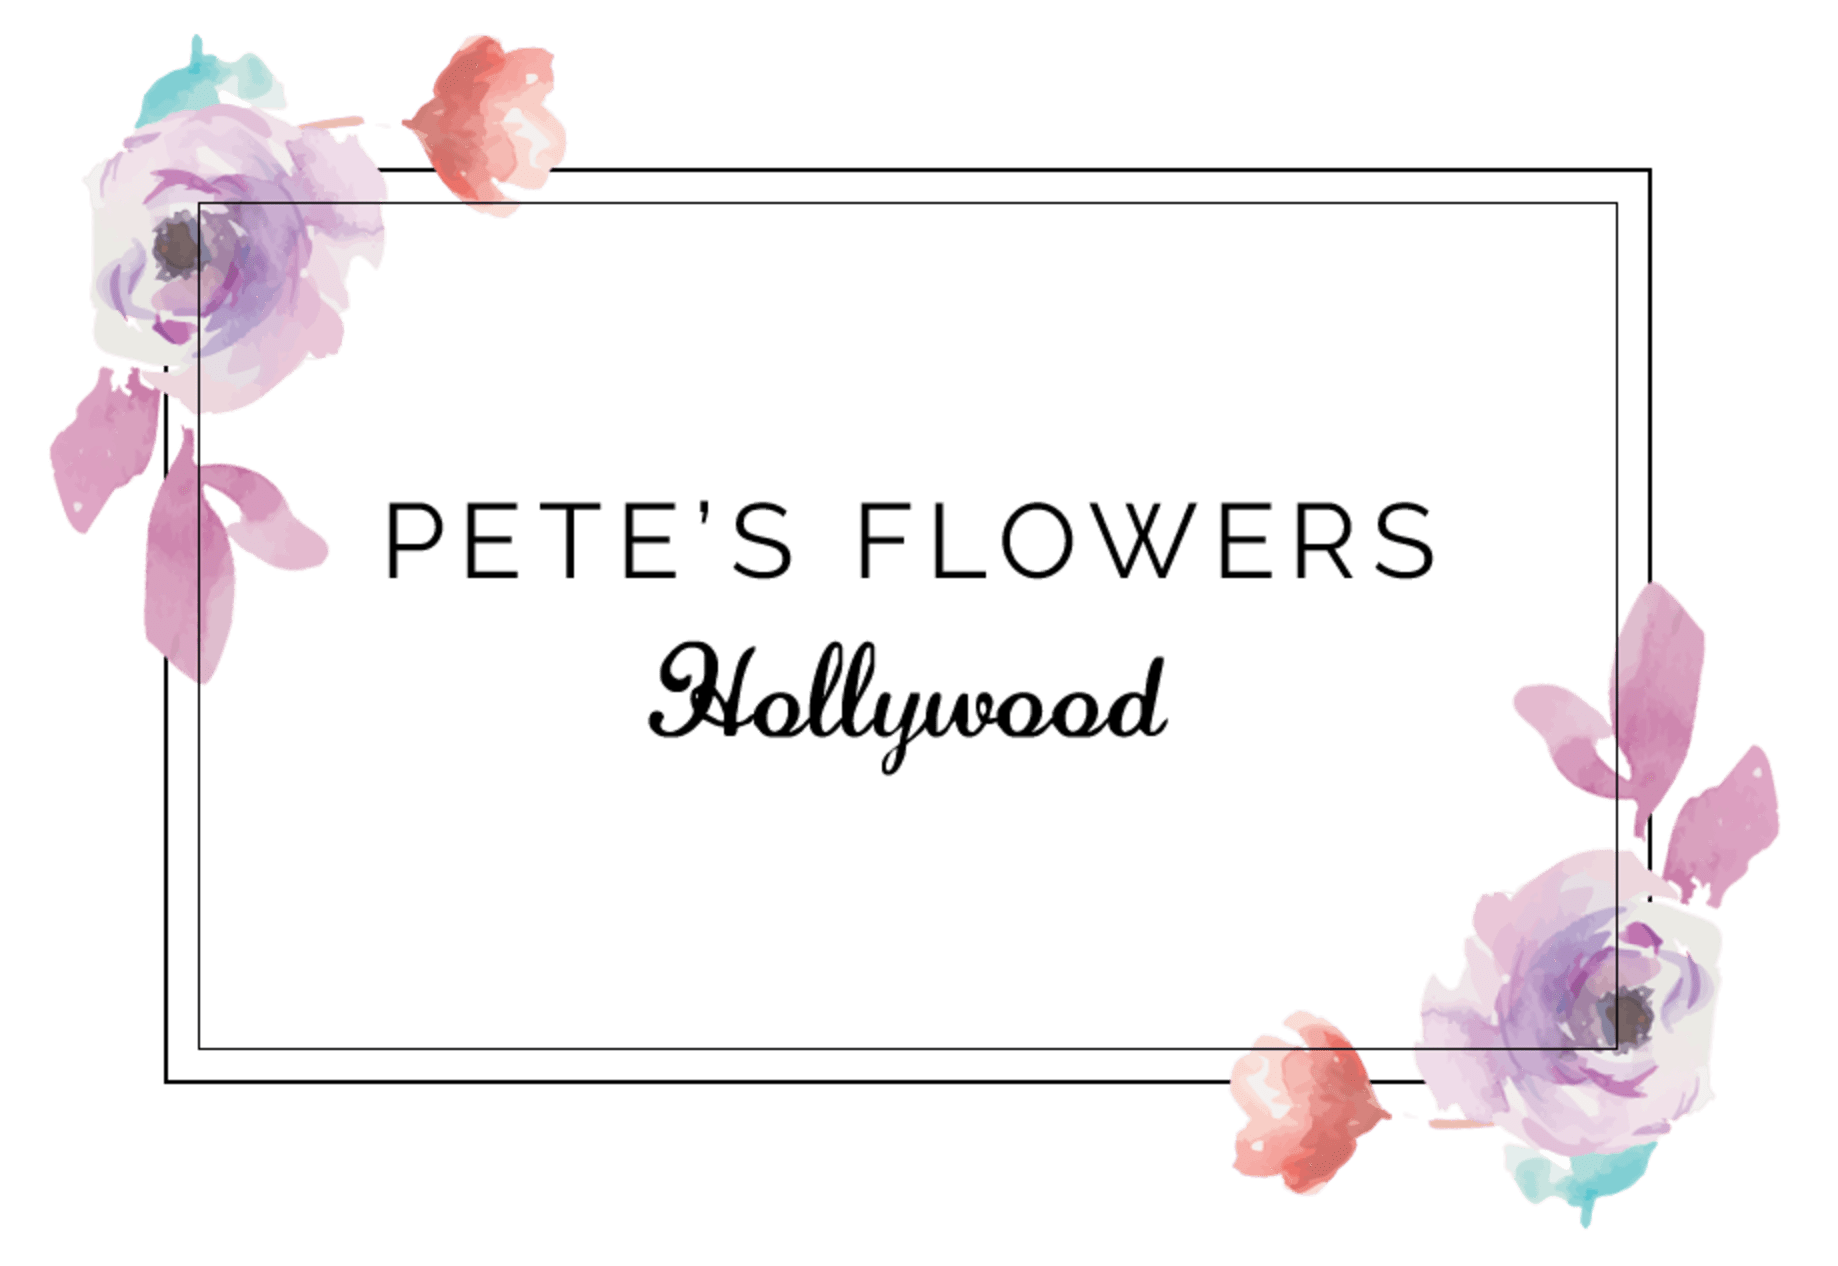 Hollywood Florist Flower Delivery By